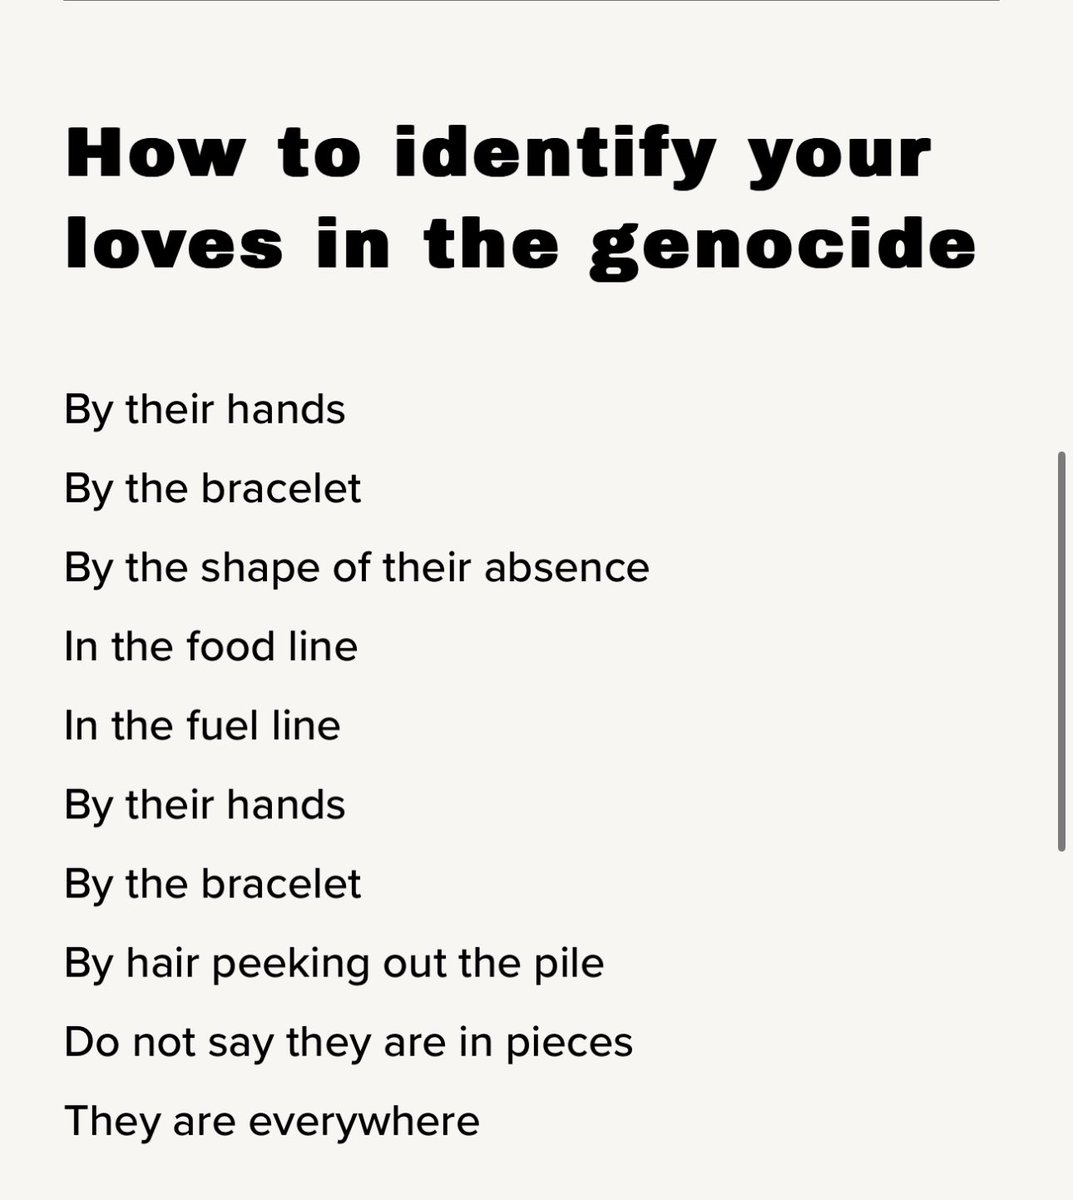 How to identify your loves in the genocide